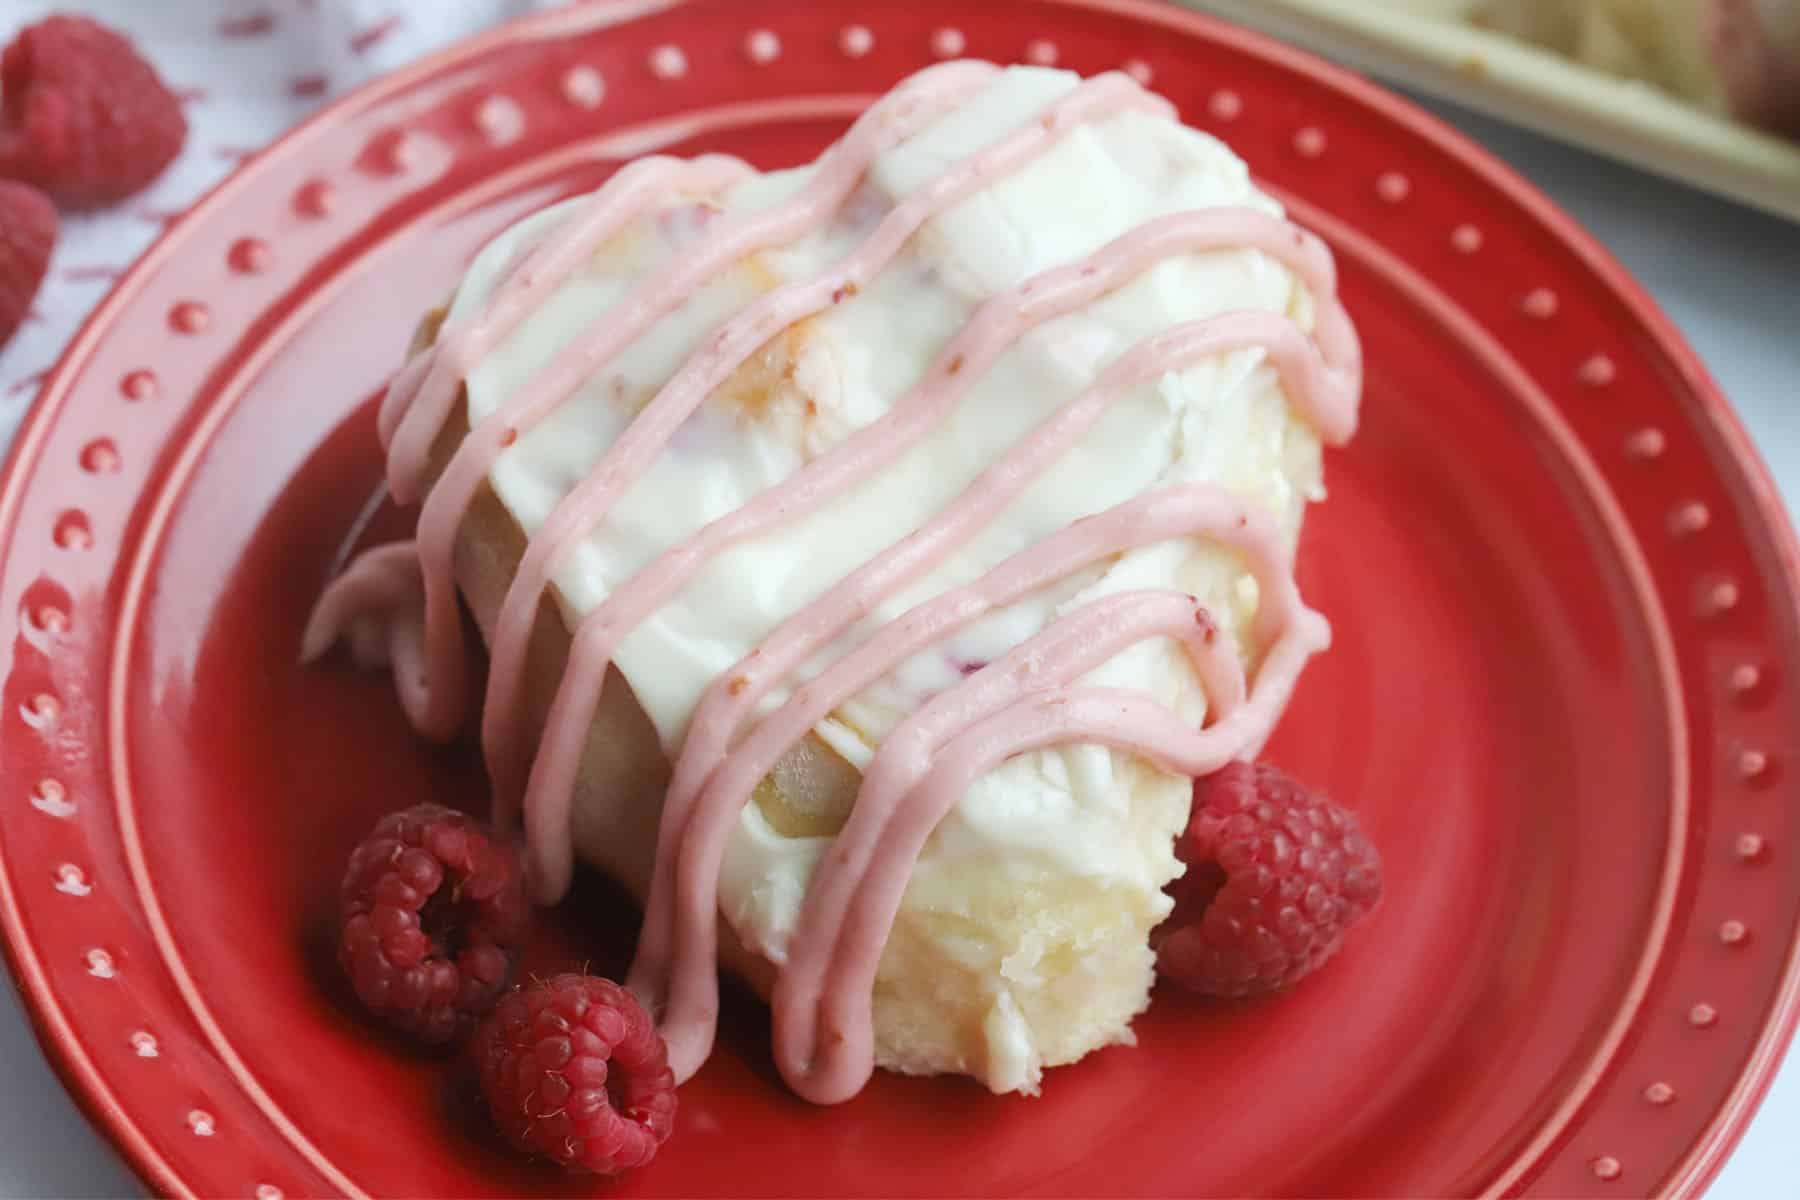 raspberry sweet roll with lemon cream cheese Frosting, cinnamon raspberry rolls decorated for valentine's day.